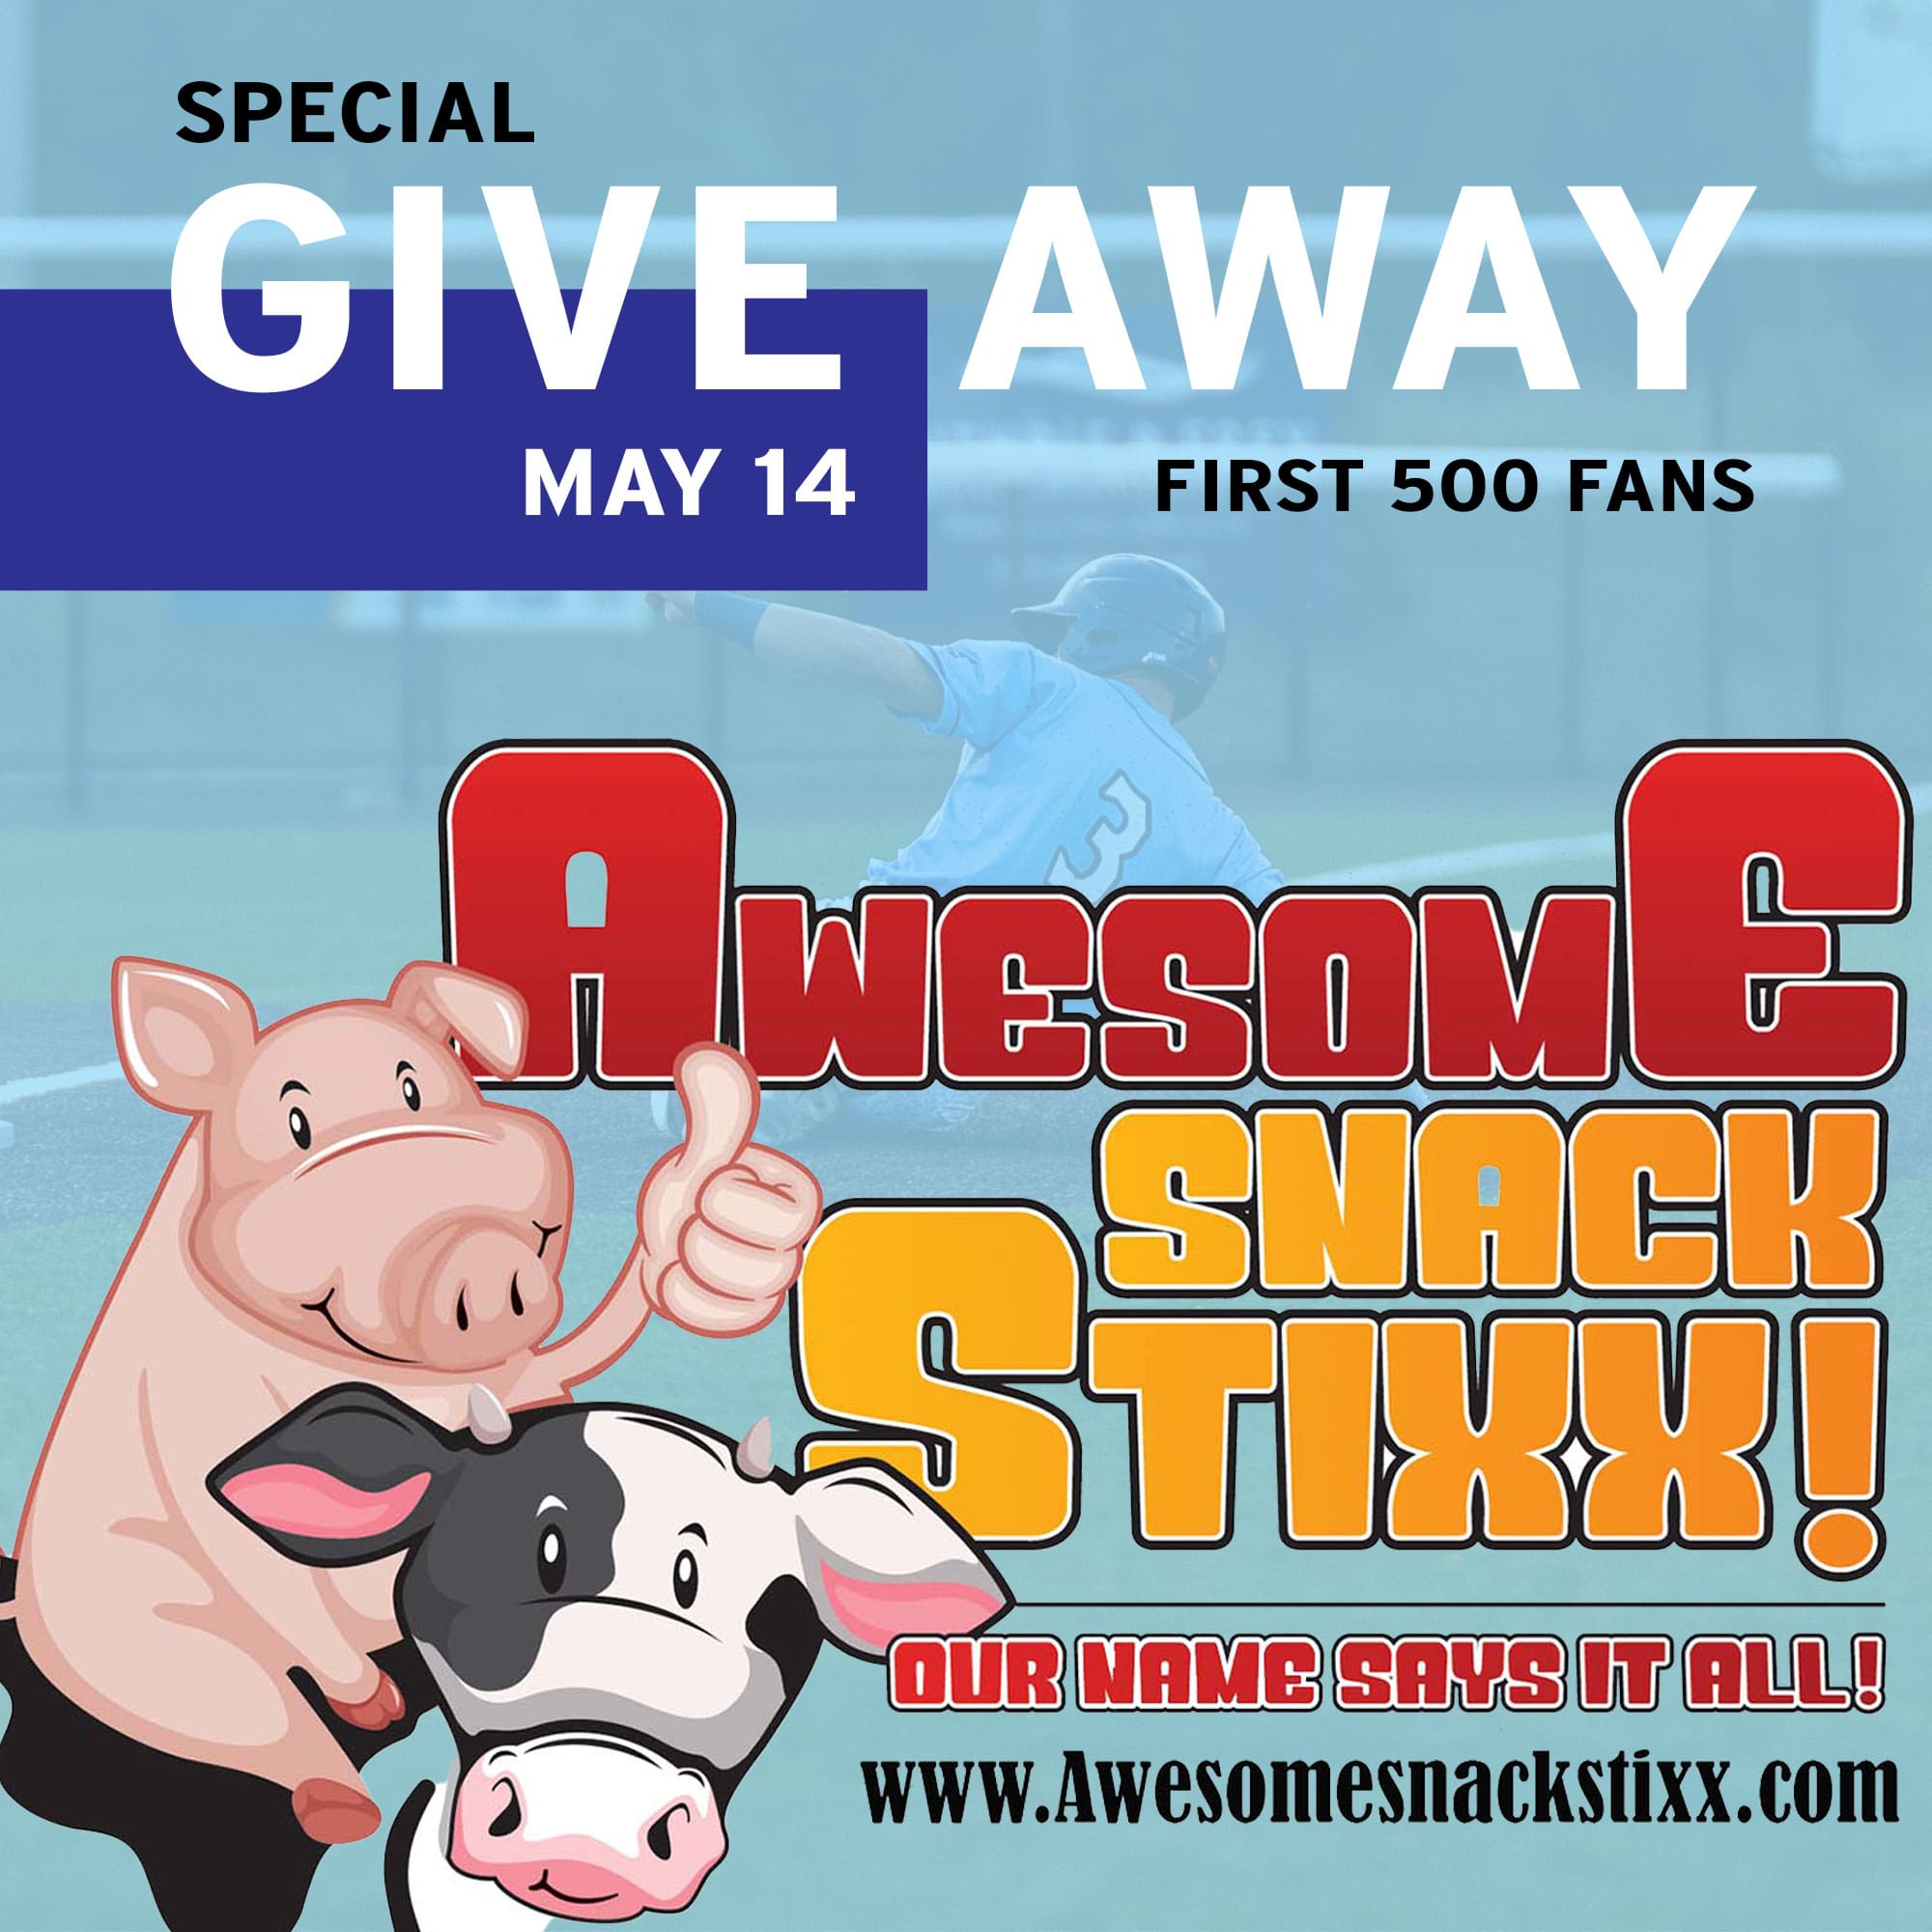 Awesome Snack Stixx Give away